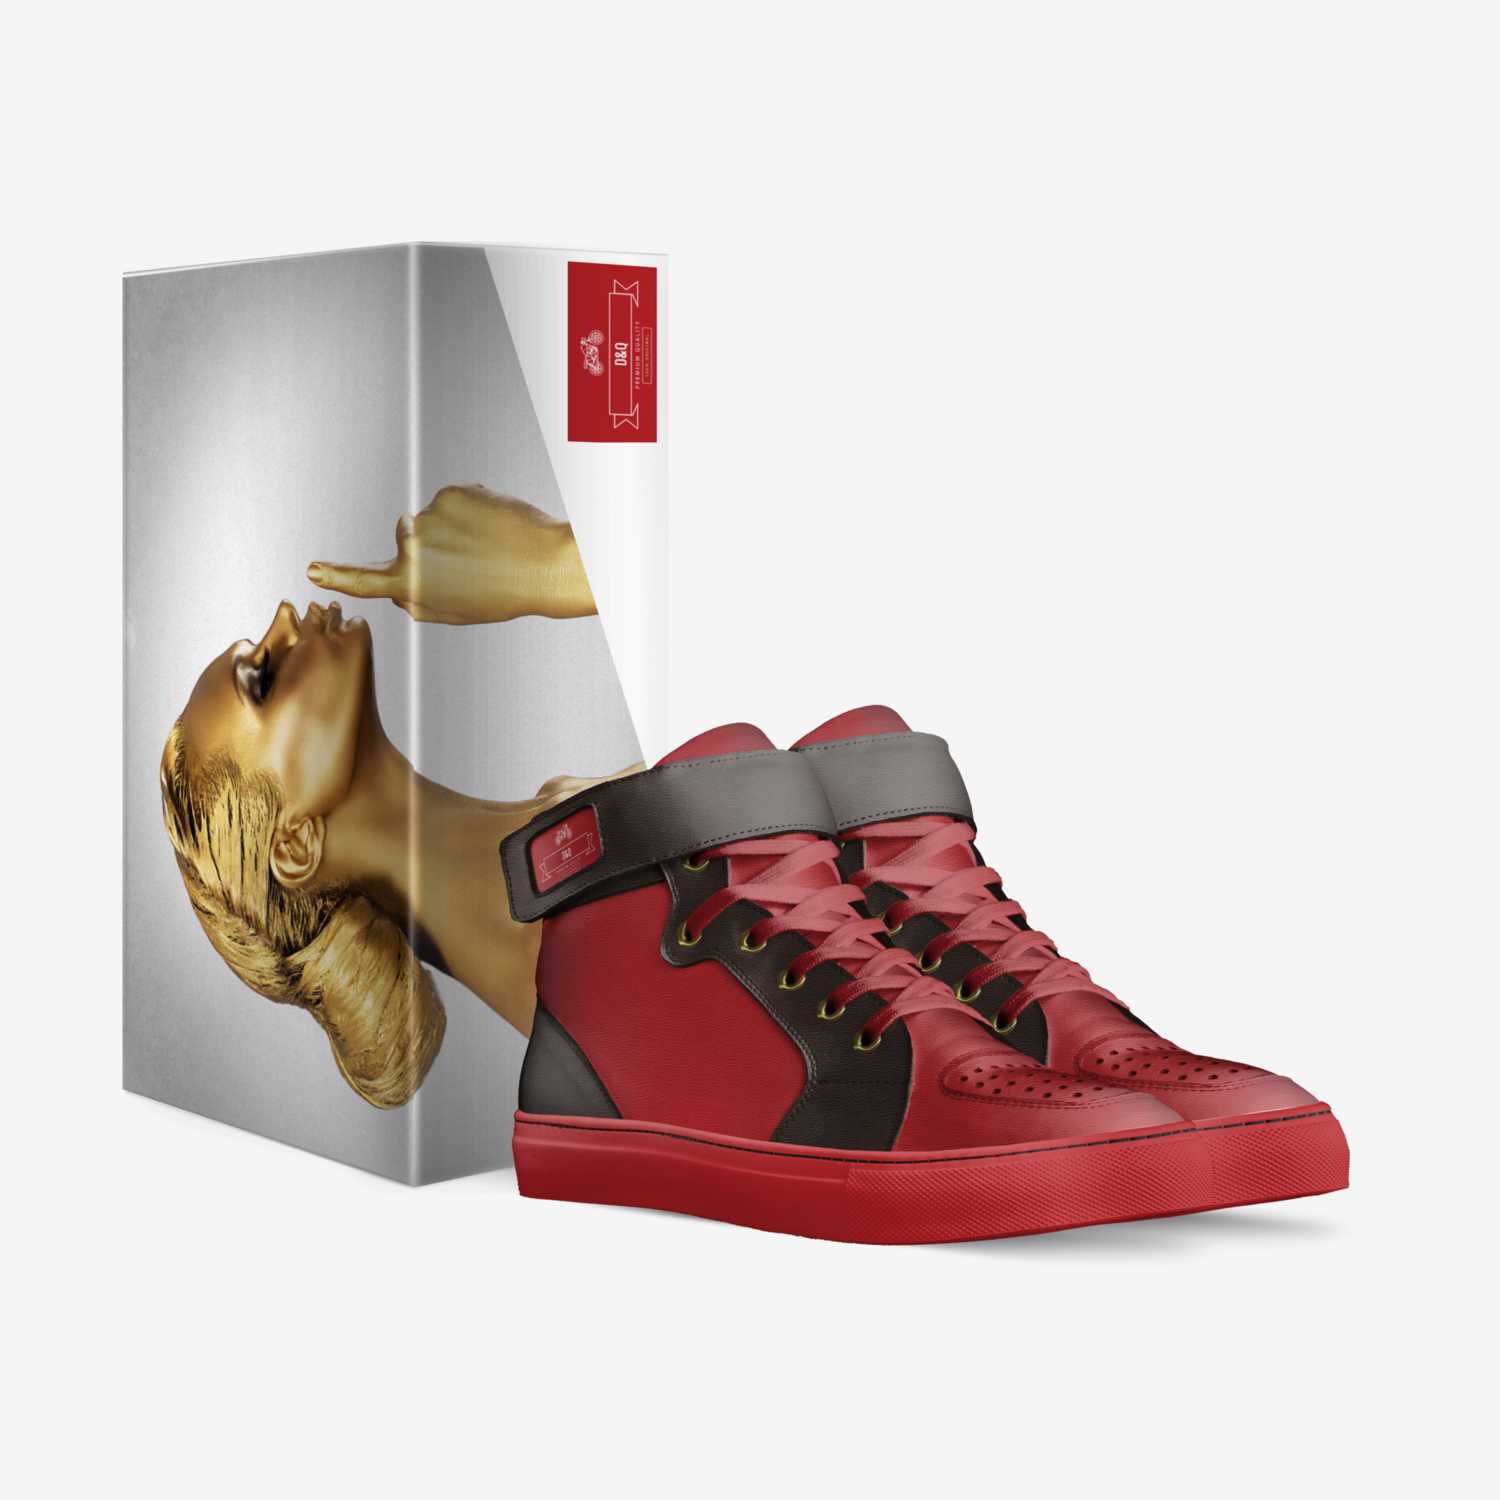 DQ custom made in Italy shoes by Dwayne Dacres | Box view